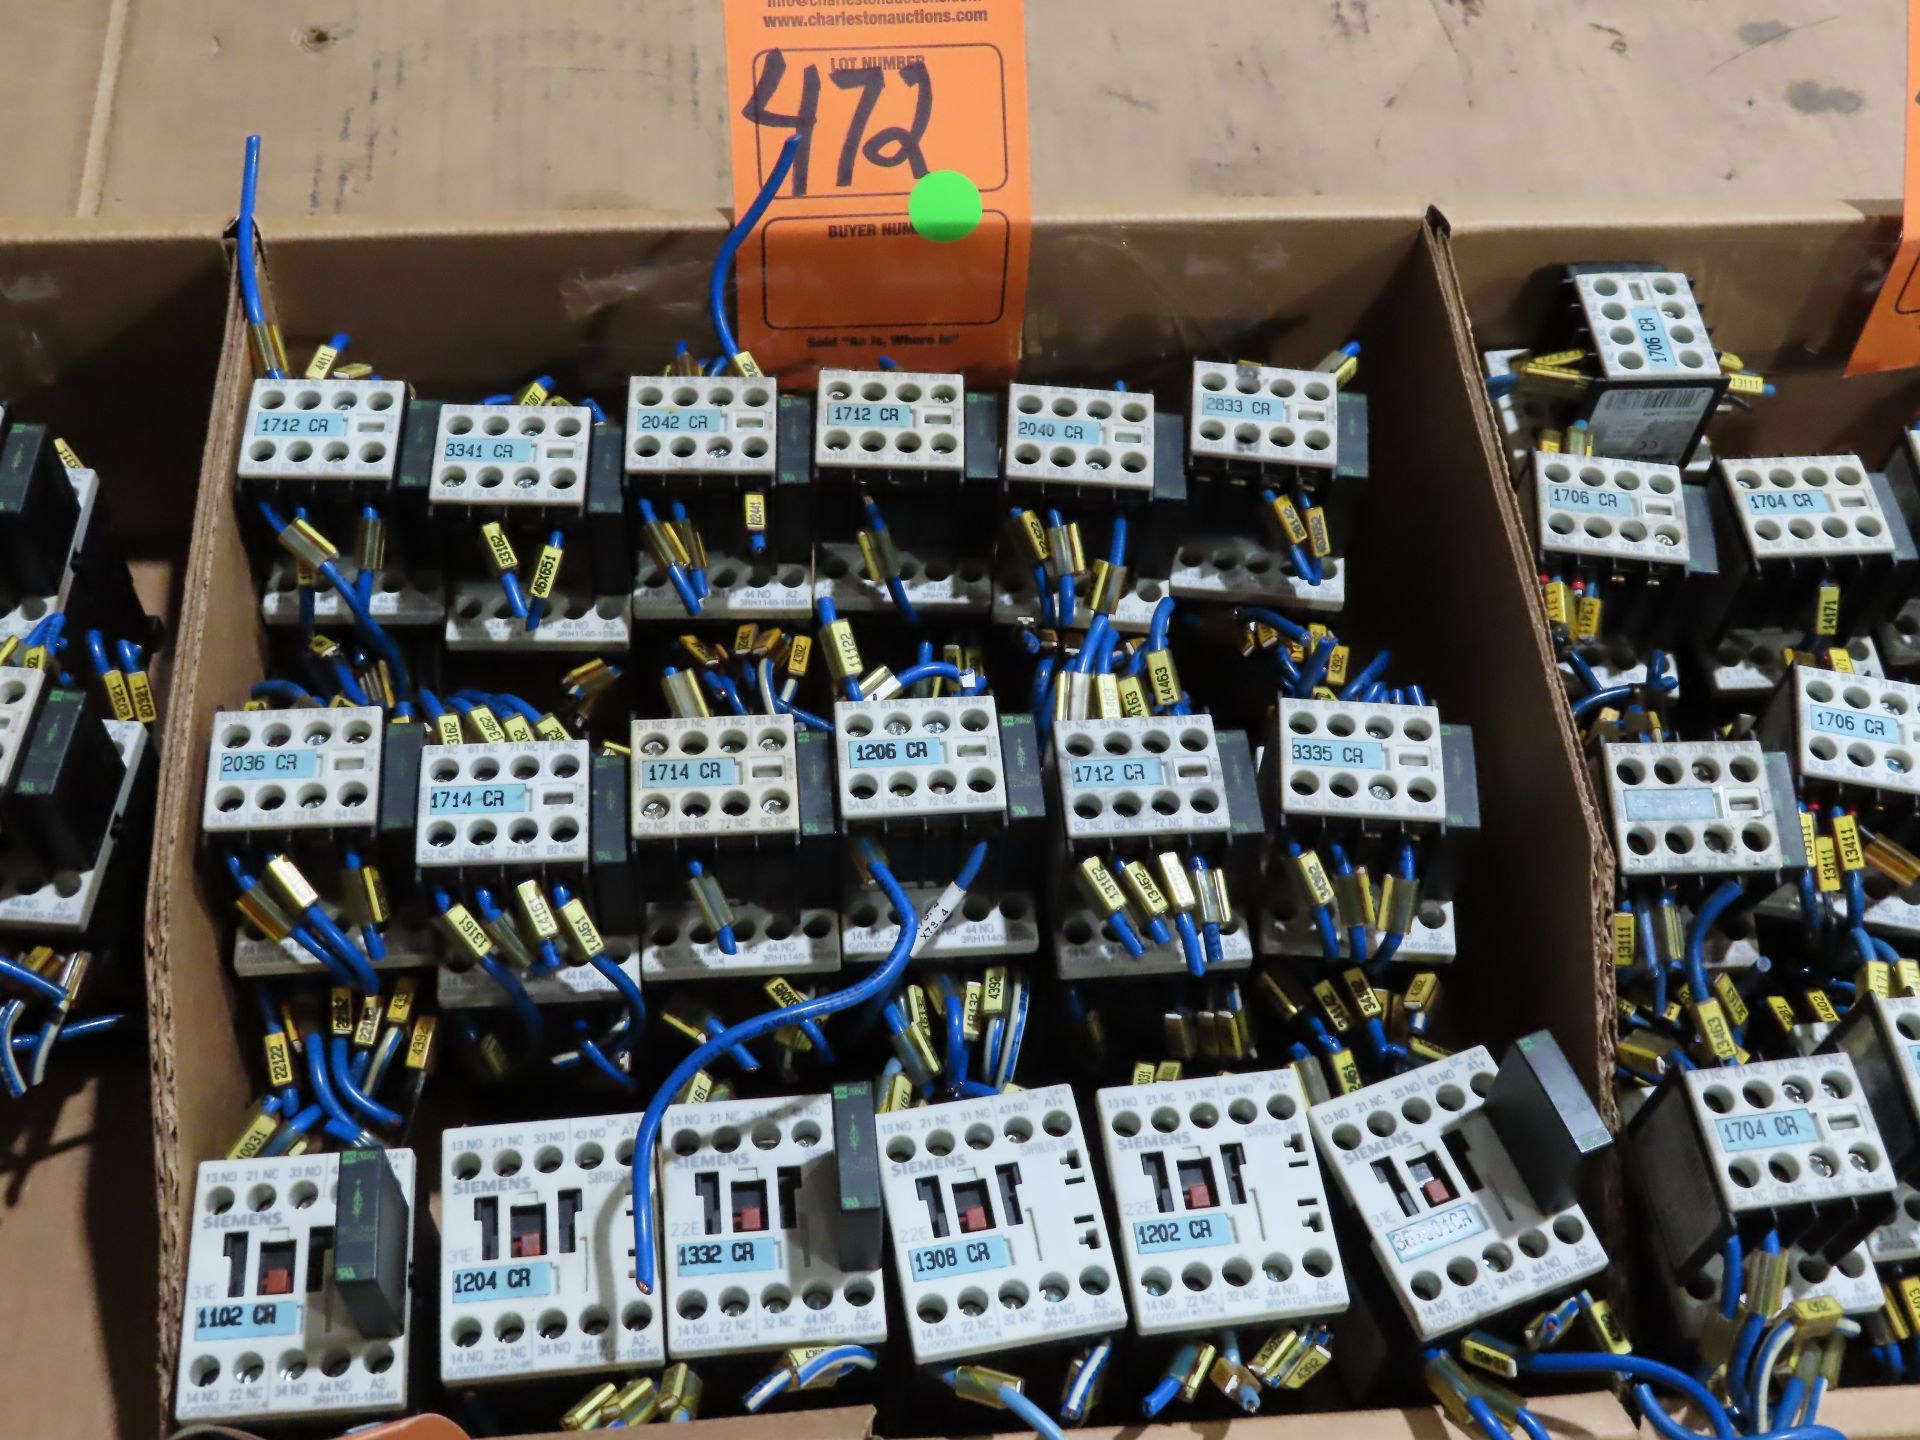 Qty 18 Siemens contactors, used parts crib spares, as always with Brolyn LLC auctions, all lots